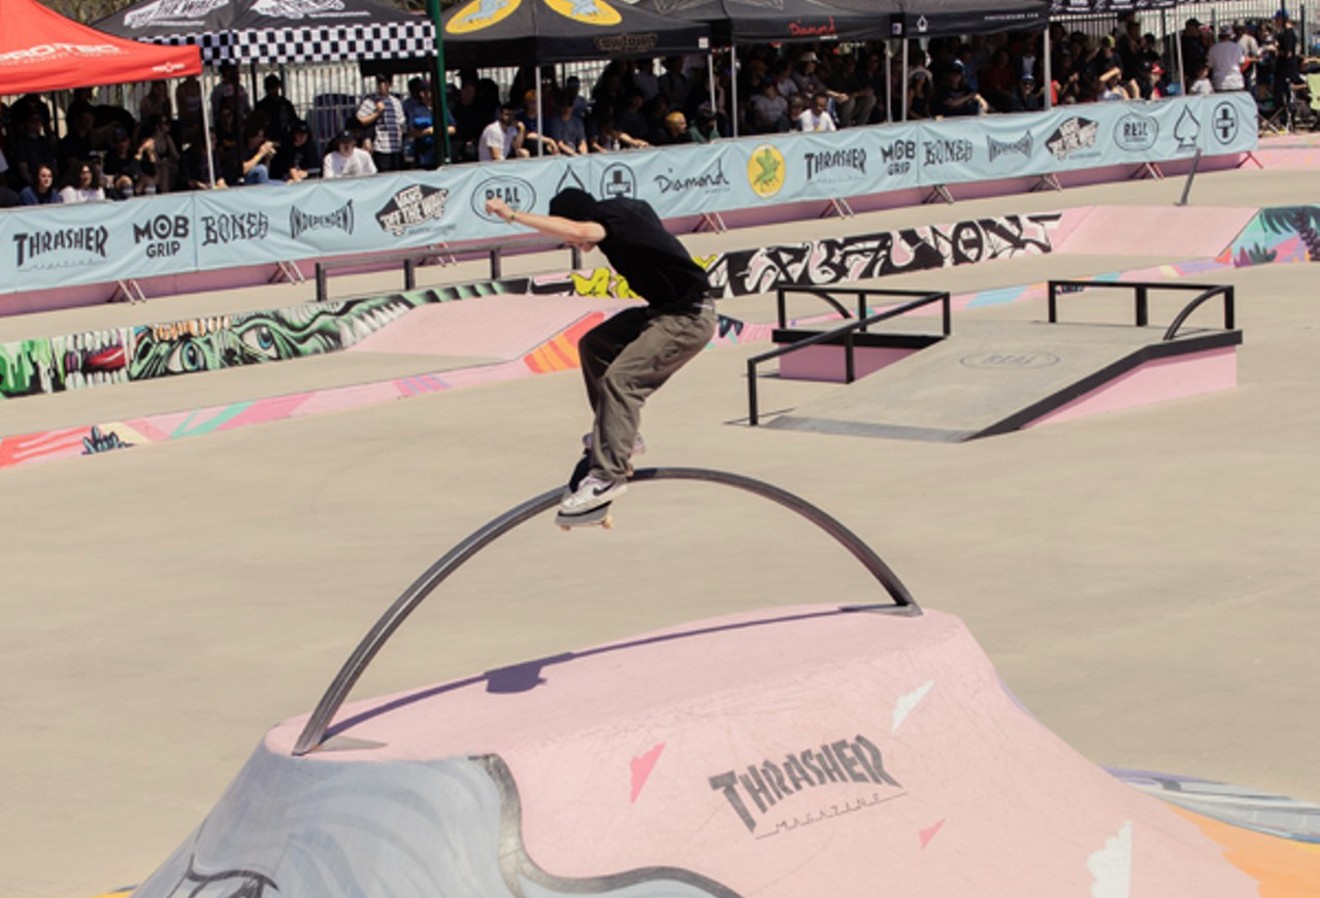 Kieran Woolley performs a smith grind over the rainbow rail at PHXAM 2022.